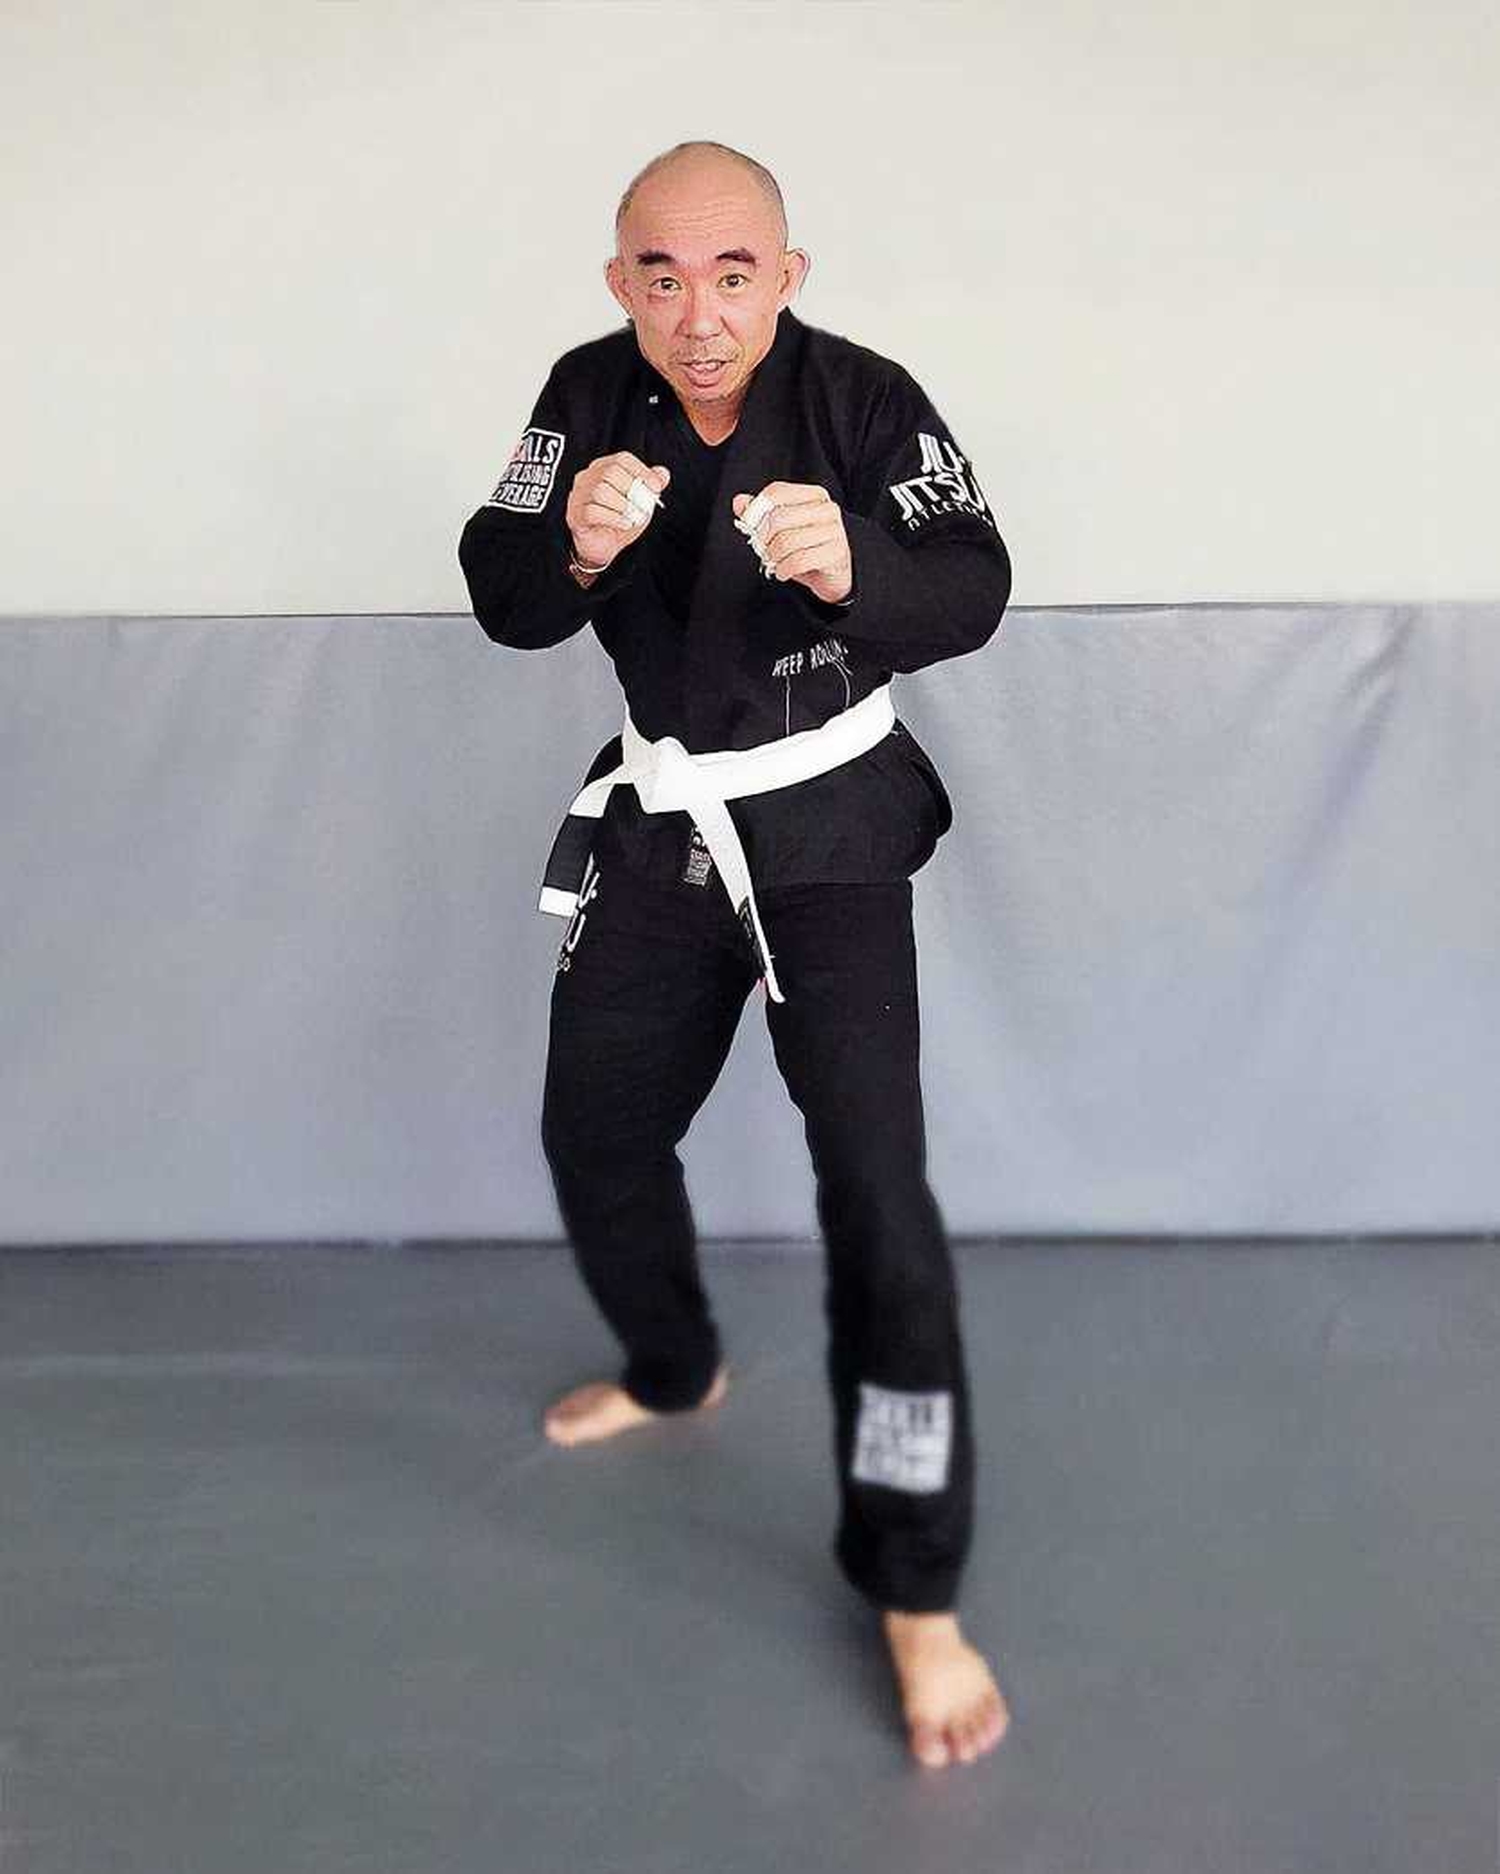 Inspector Tan Buck Song facing the camera, donned in his black martial arts uniform and white belt around his waist, posing in a martial arts stance, his left foot in front of his right, and his fists propped up.